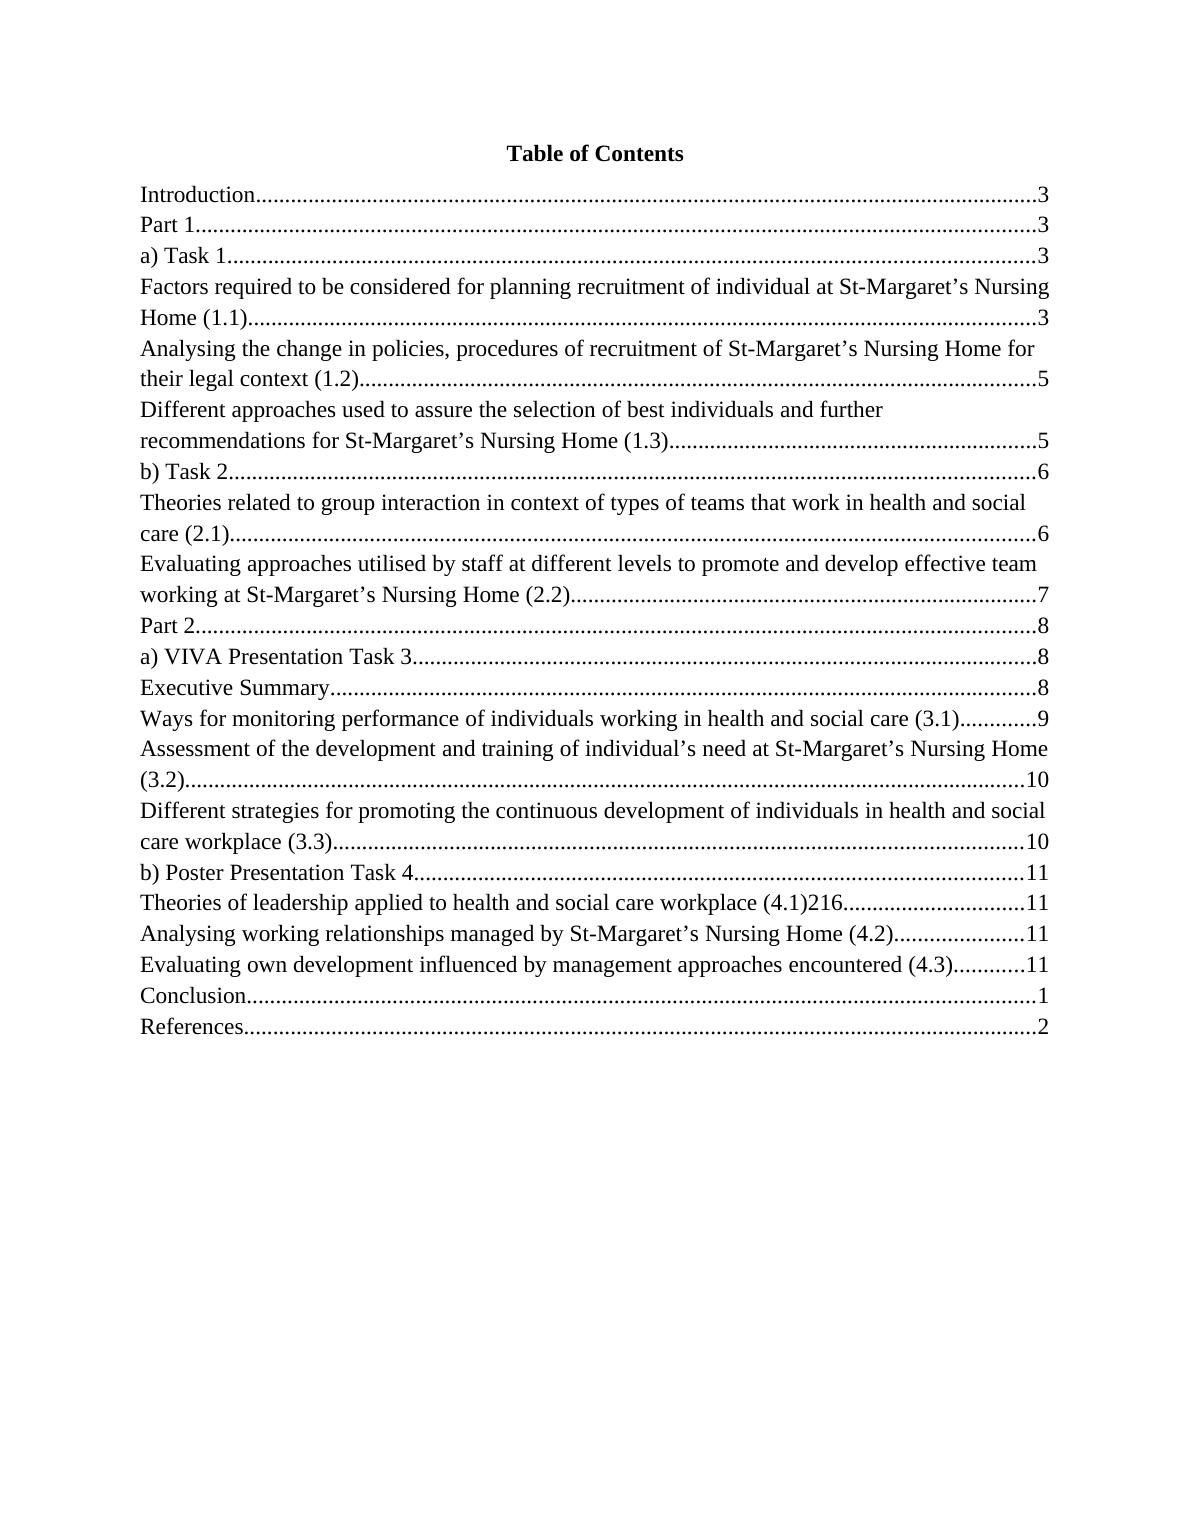 Managing Human Resources in Health & Social Care : Report_2